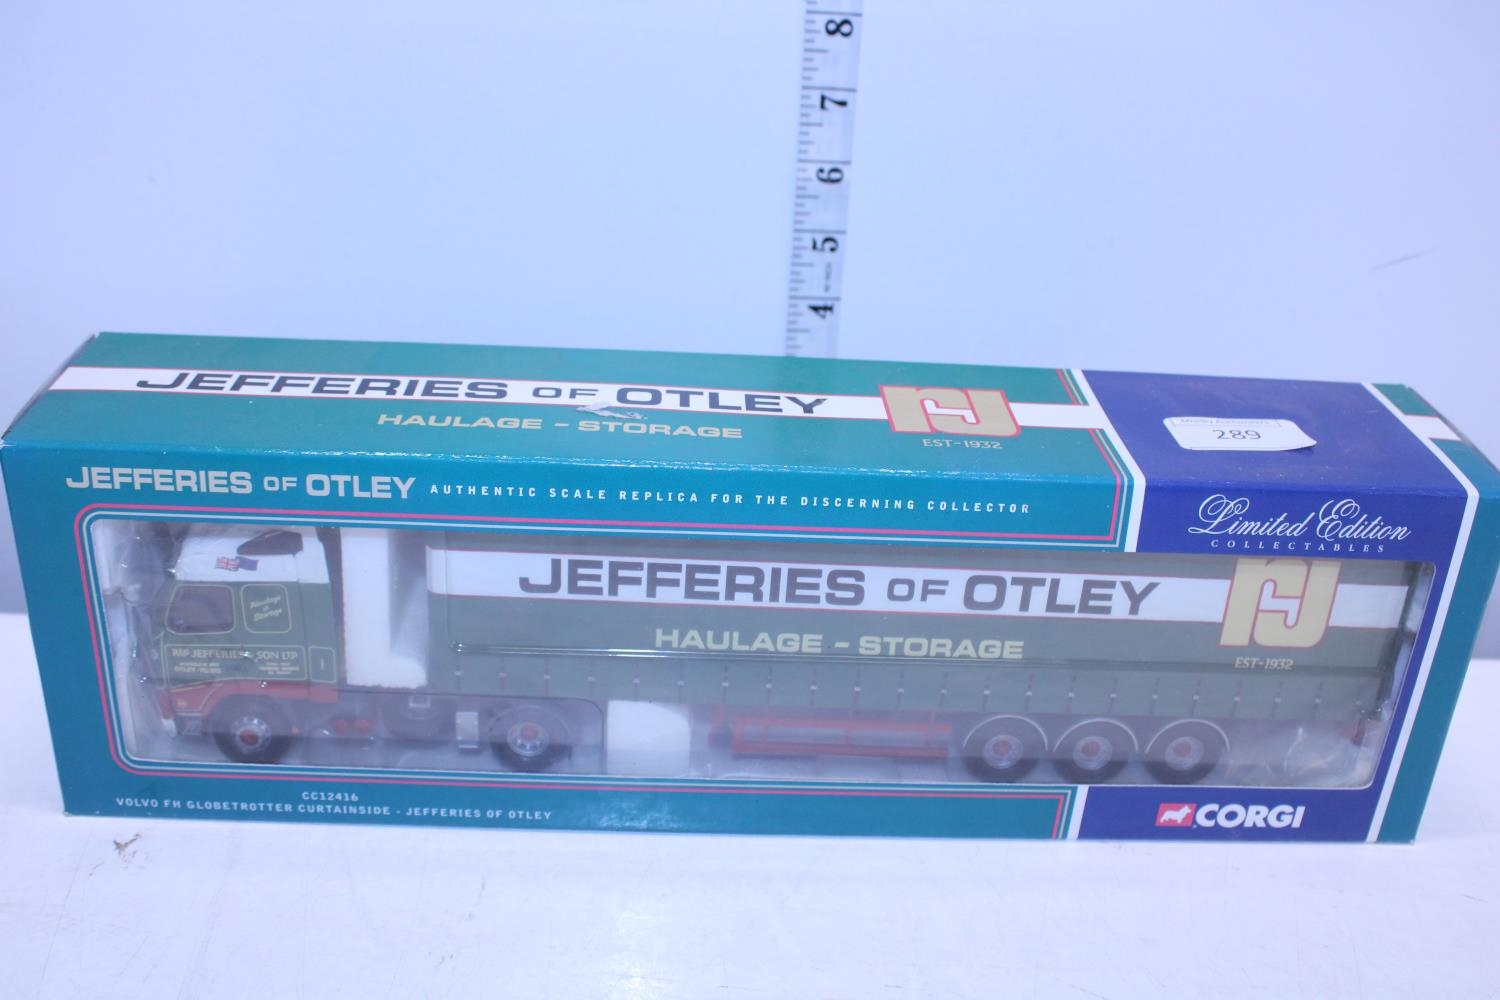 A boxed limited edition Corgi die-cast truck model